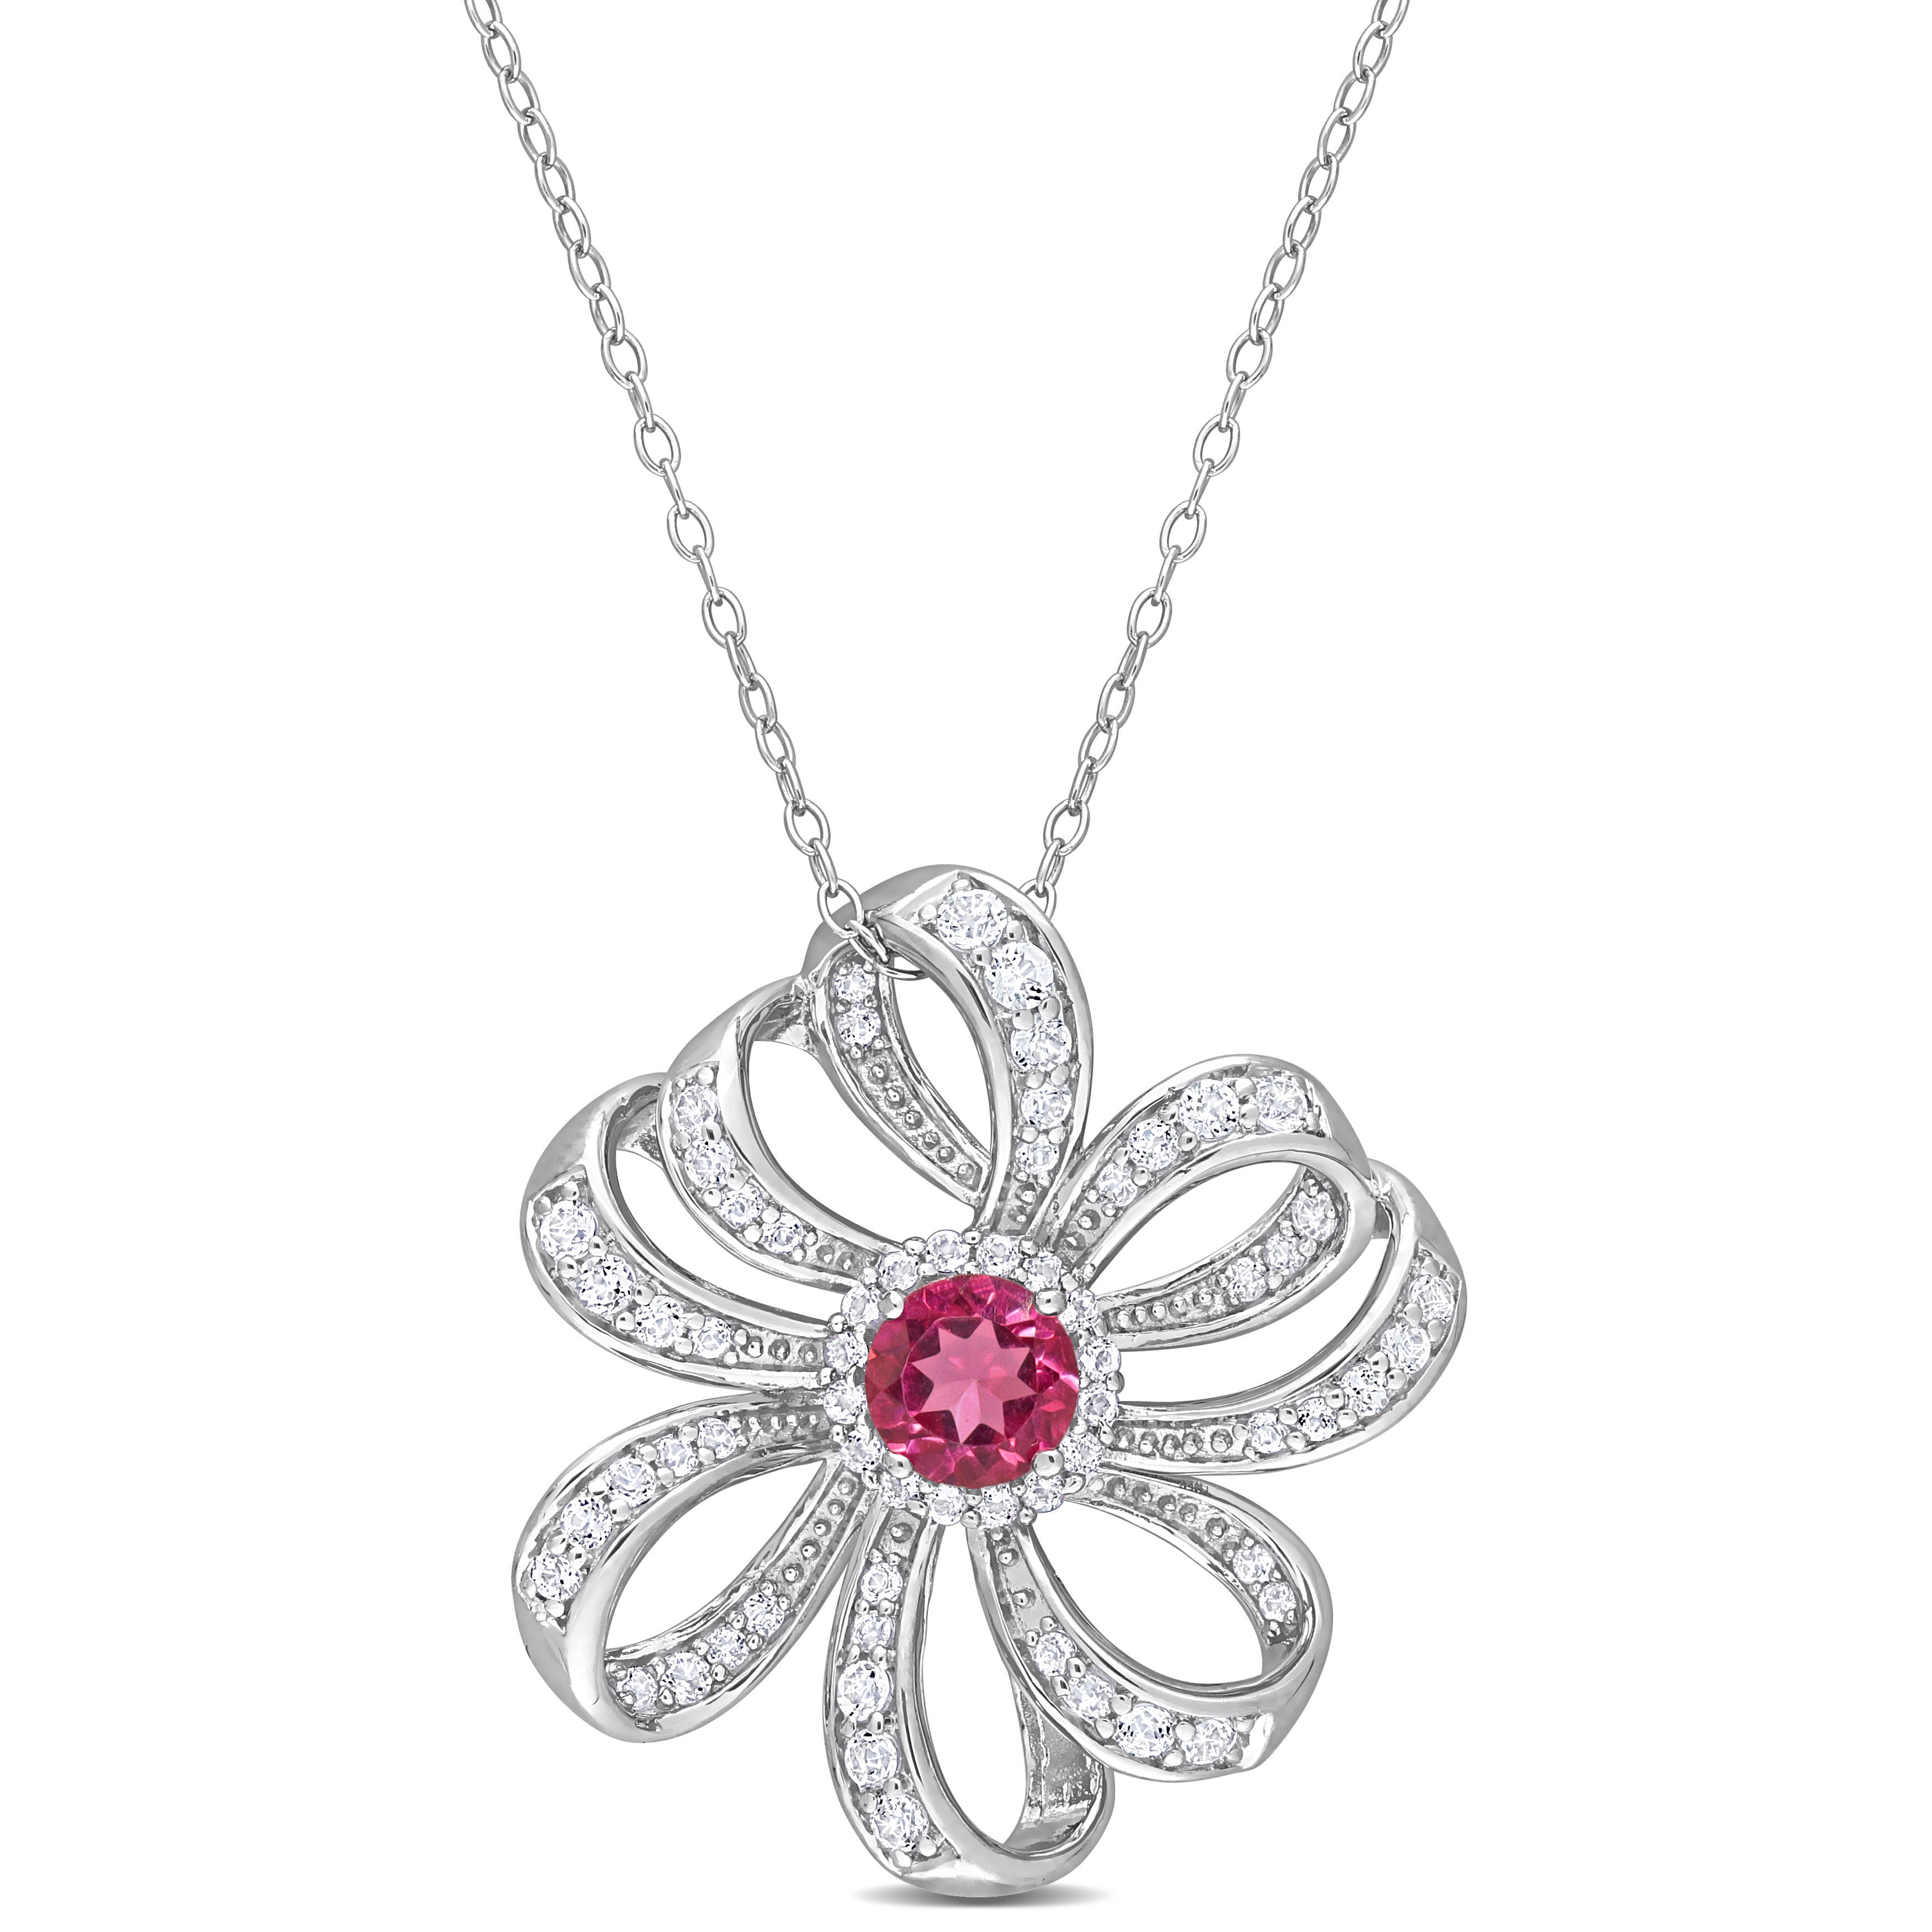 2 3/4 CT TGW Pink Topaz and White Topaz Flower Pendant with Chain in Sterling Silver